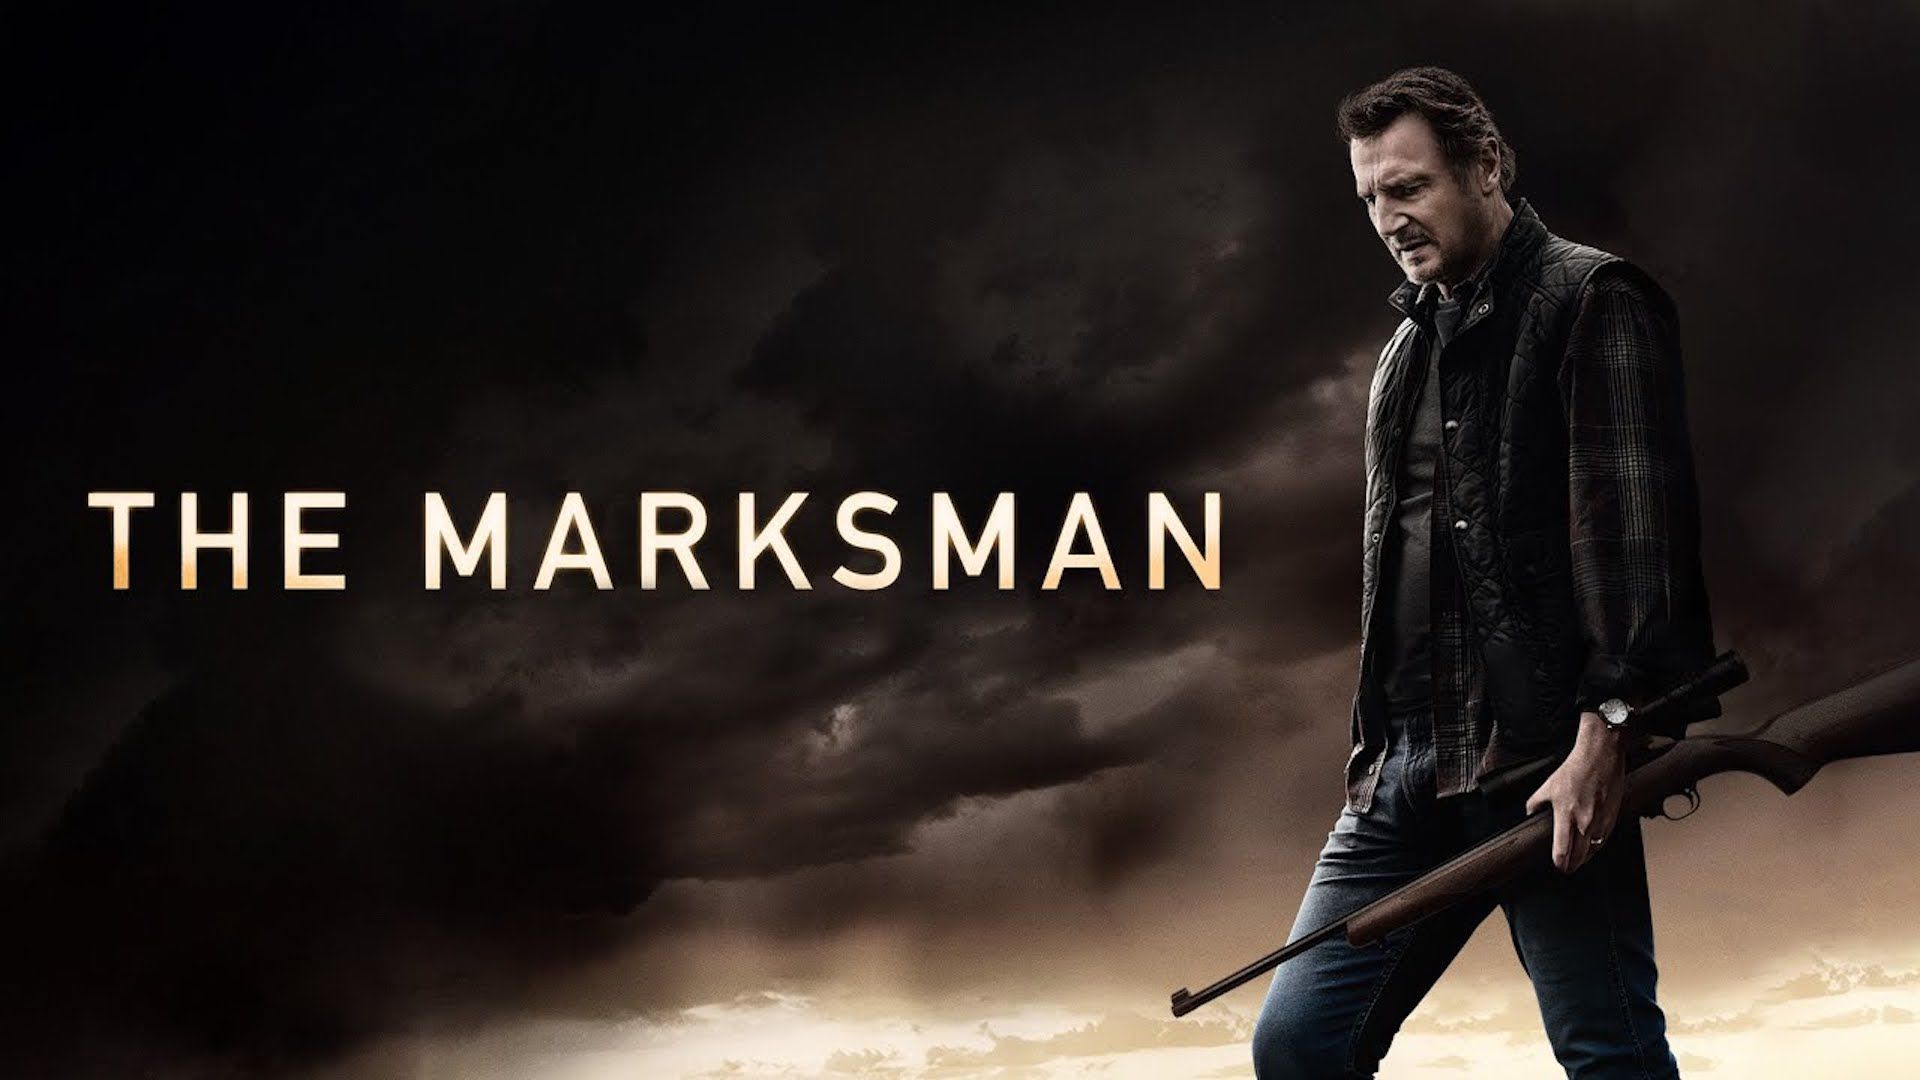 Looking to watch 'The Marksman'? Here are the best places to stream it